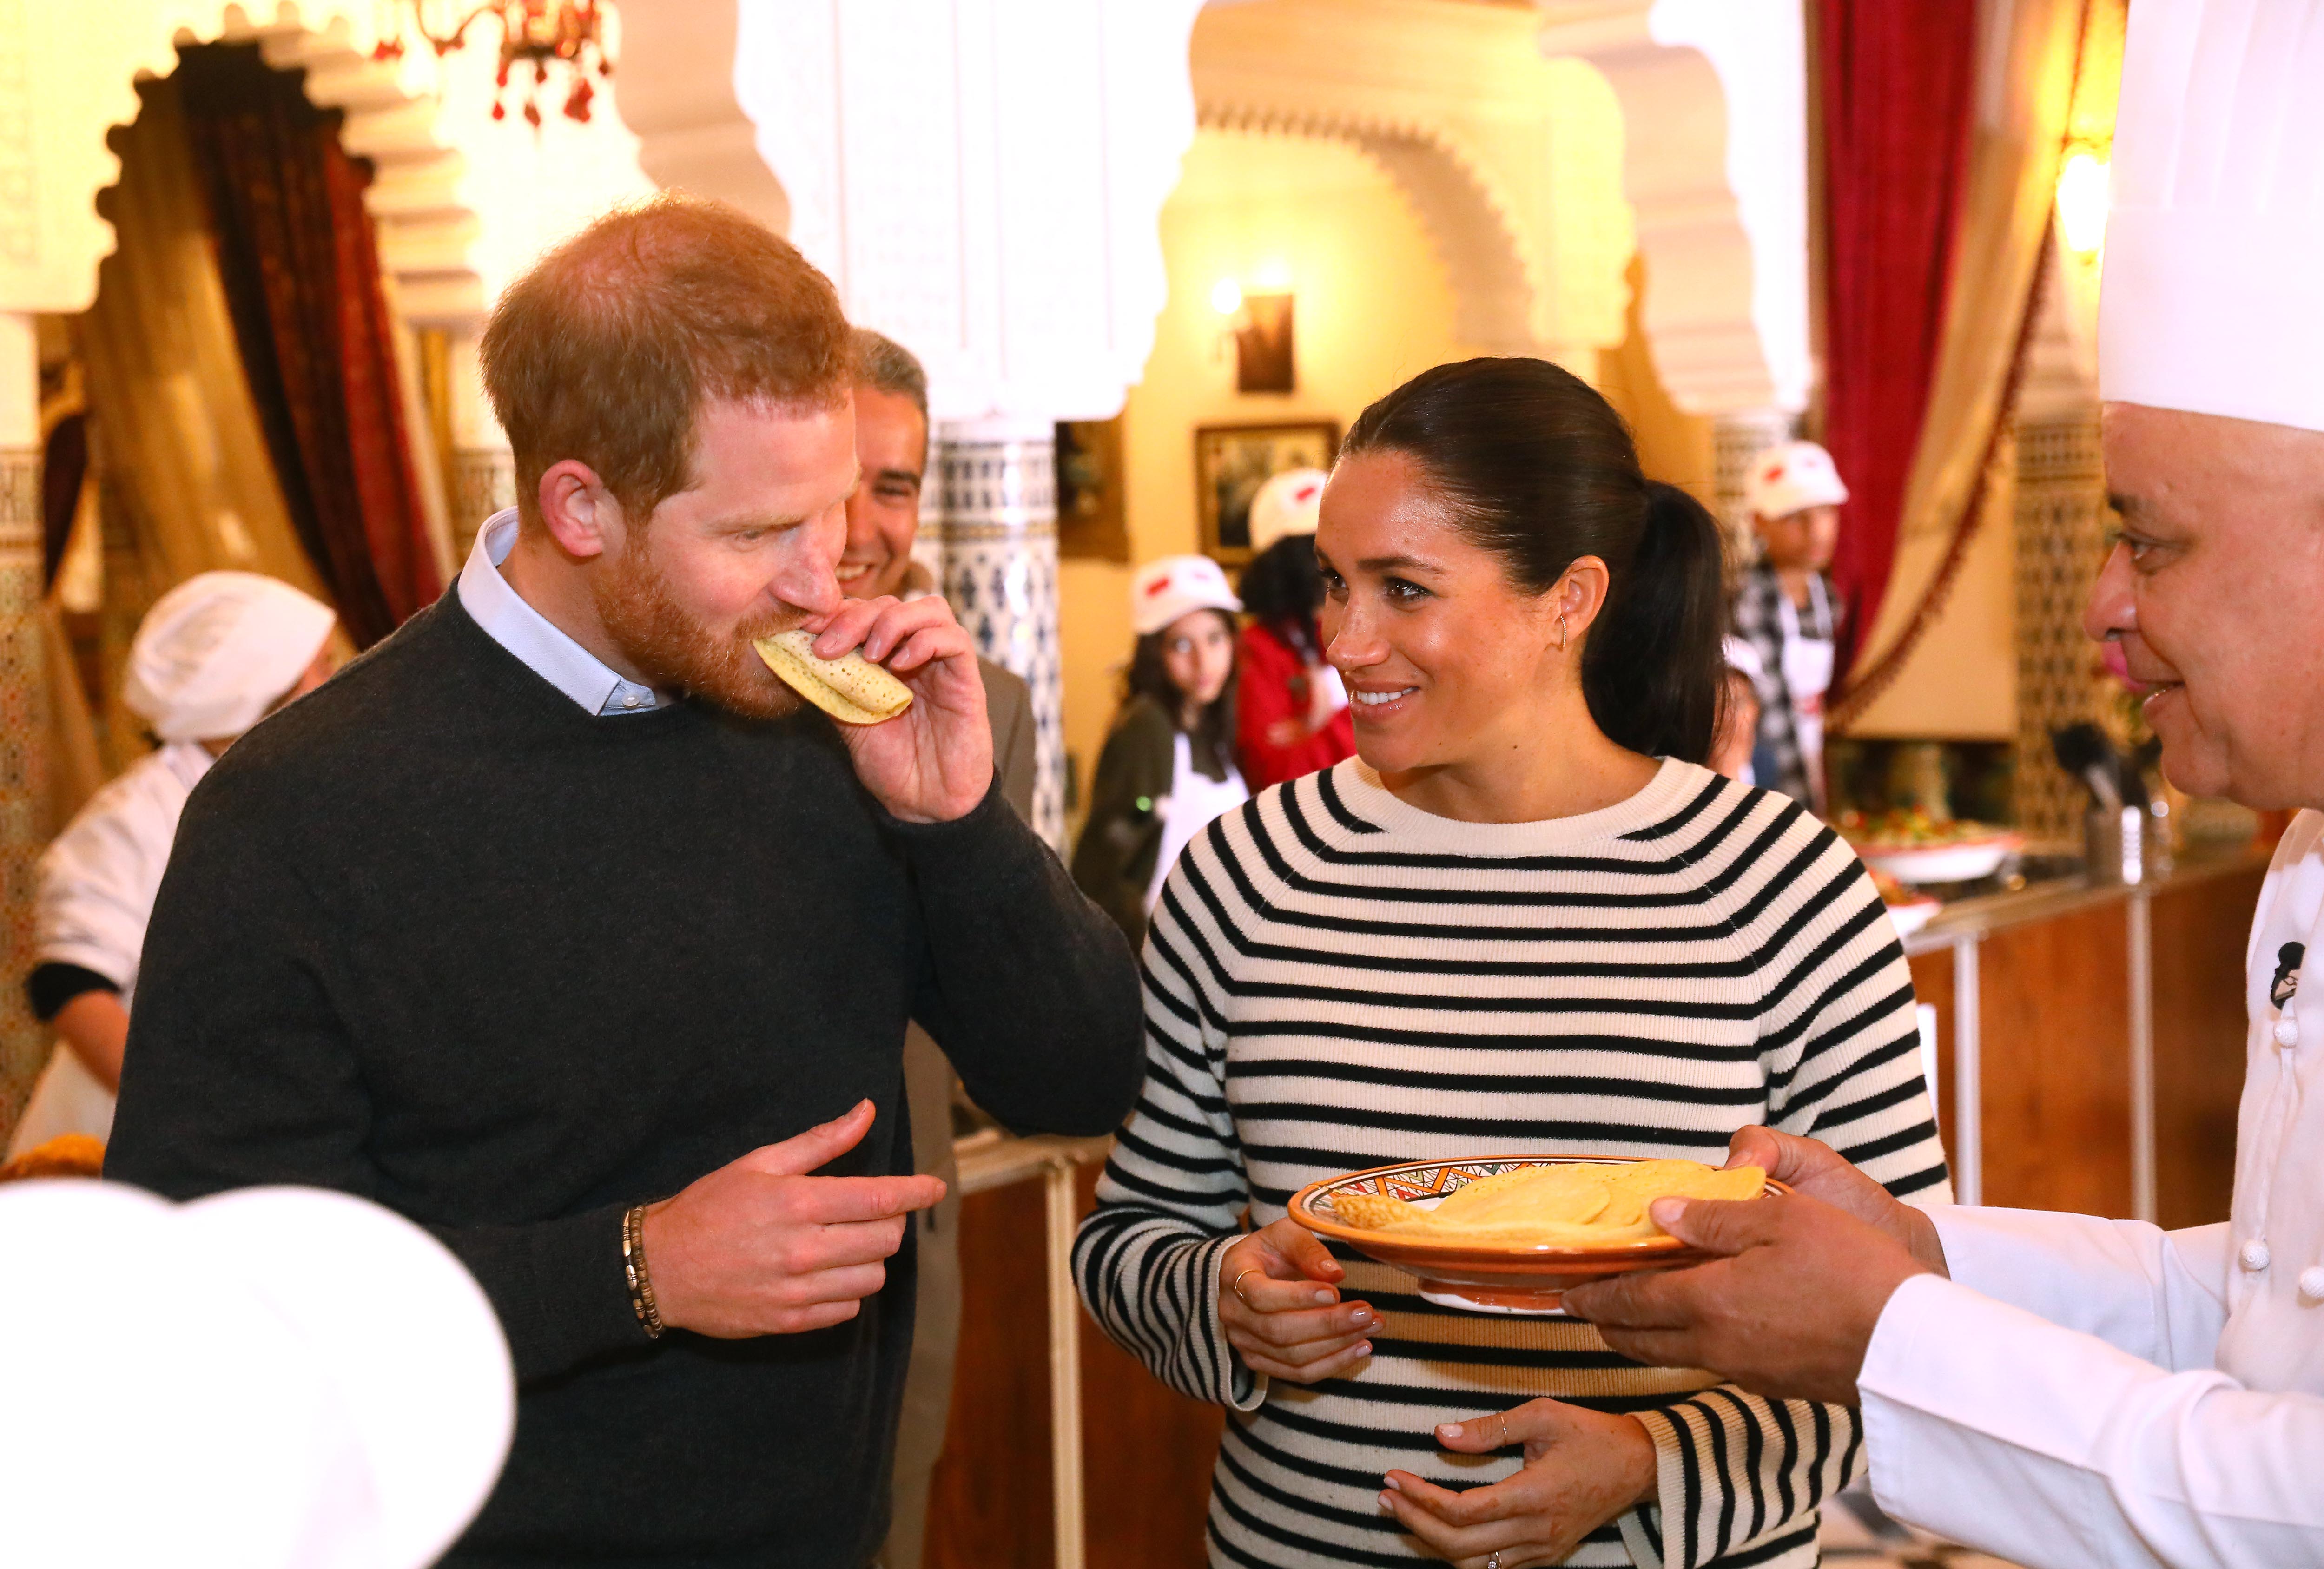 Prince Harry, Duke of Sussex and Meghan, Duchess of Sussex try some food as they visit a cooking demonstration at the Villa des Ambassadors in Rabat, Morocco, on February 25, 2019. | Source: Getty Images